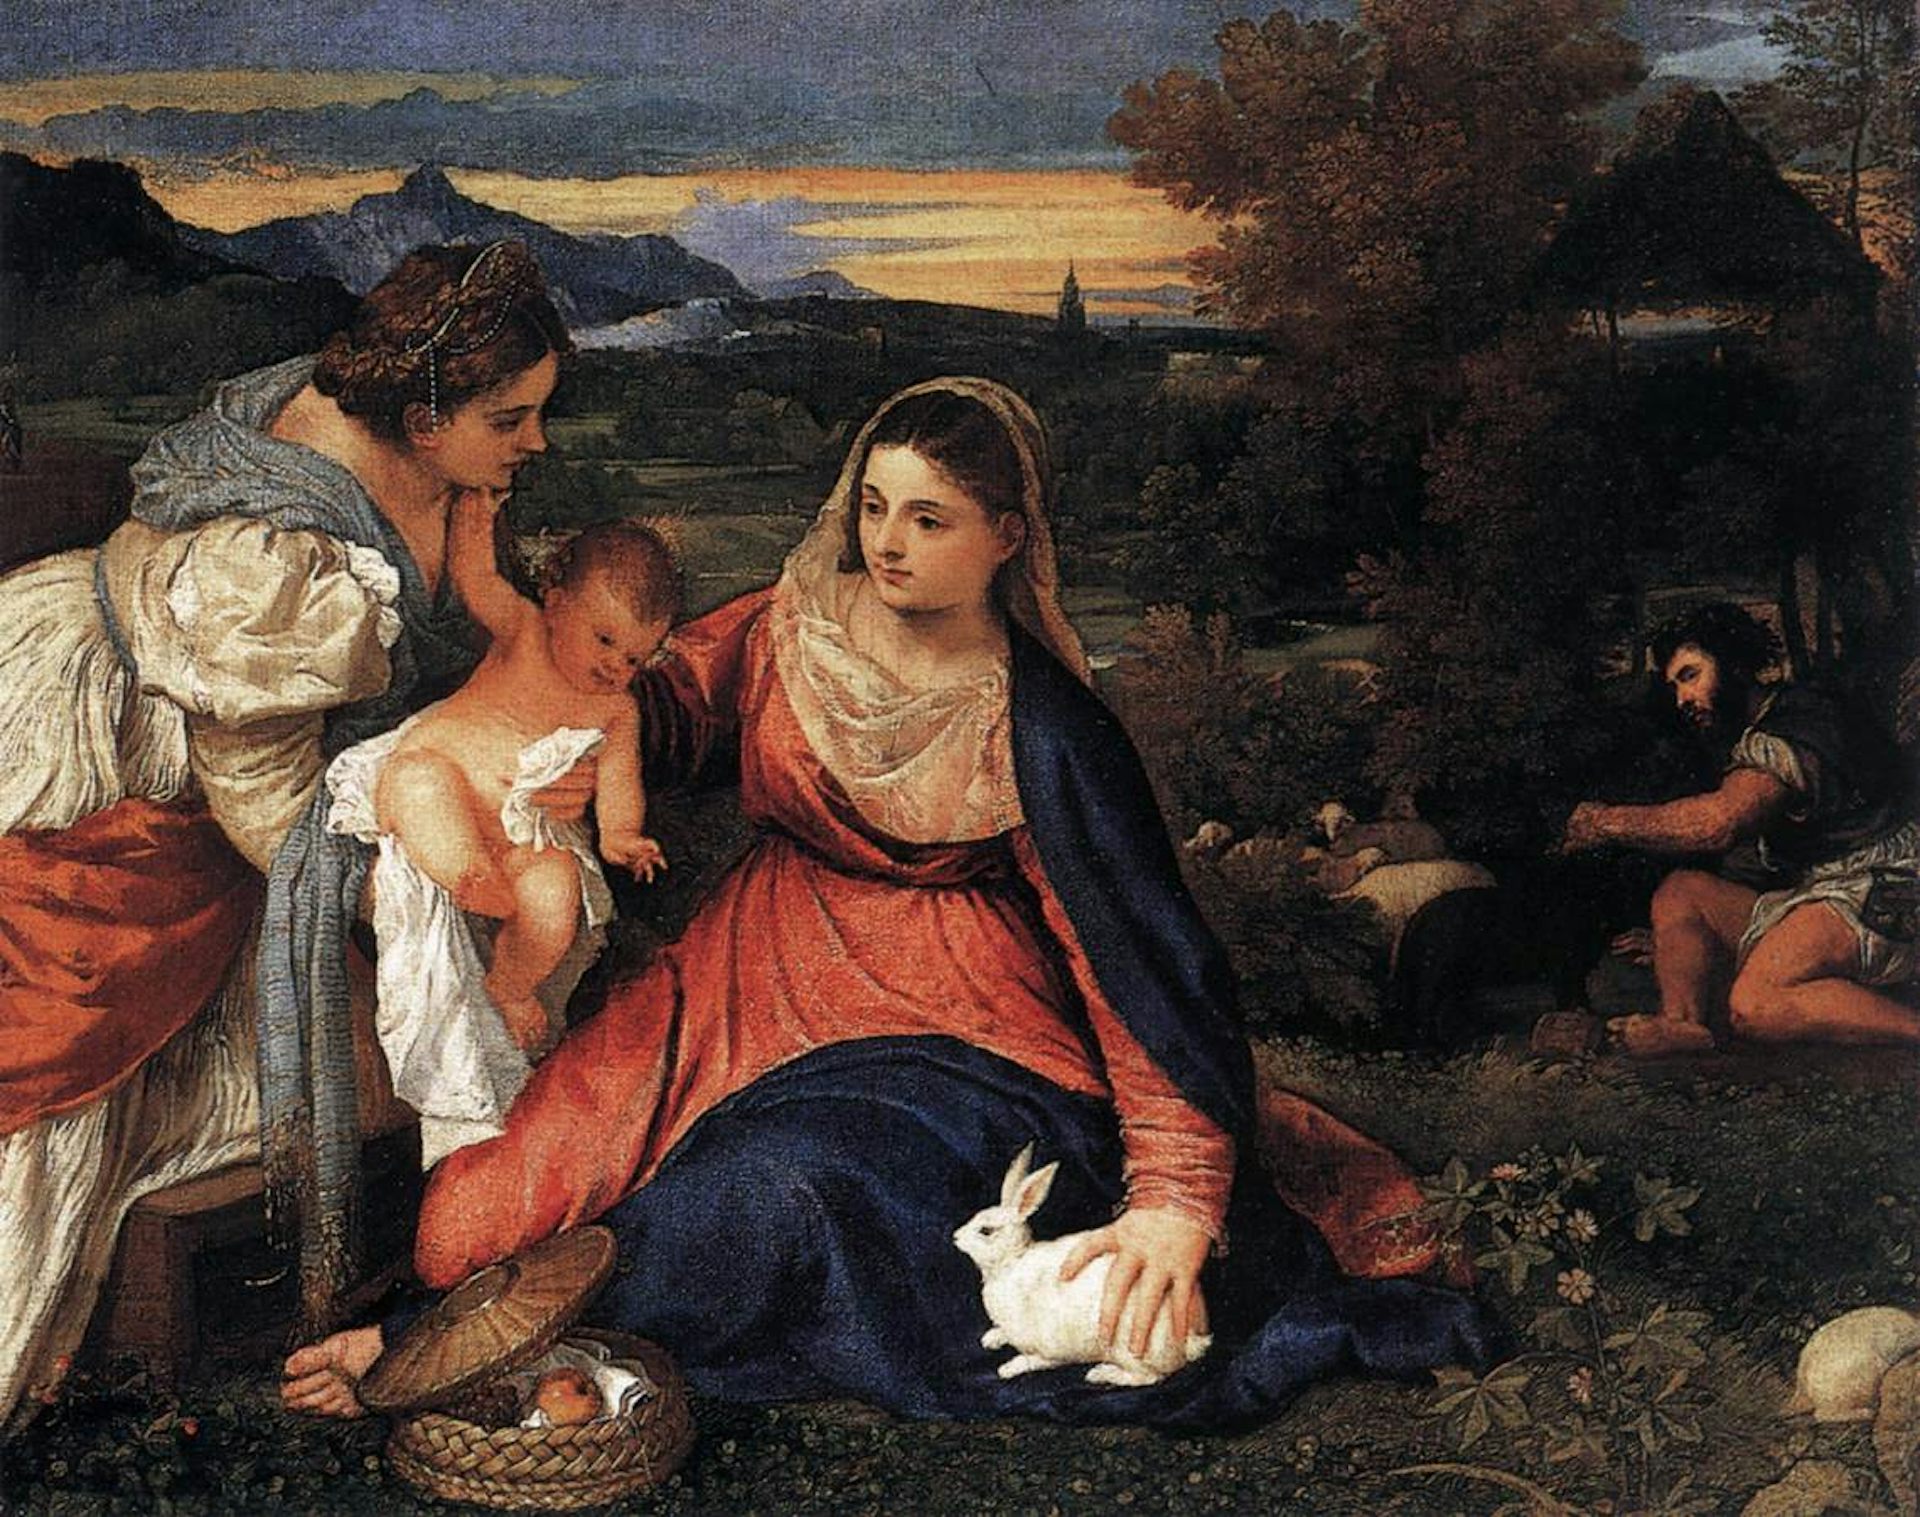 A painting depicting a young woman handing baby Jesus to Virgin Mary, who puts one hand around him, while holding a hare with the other.